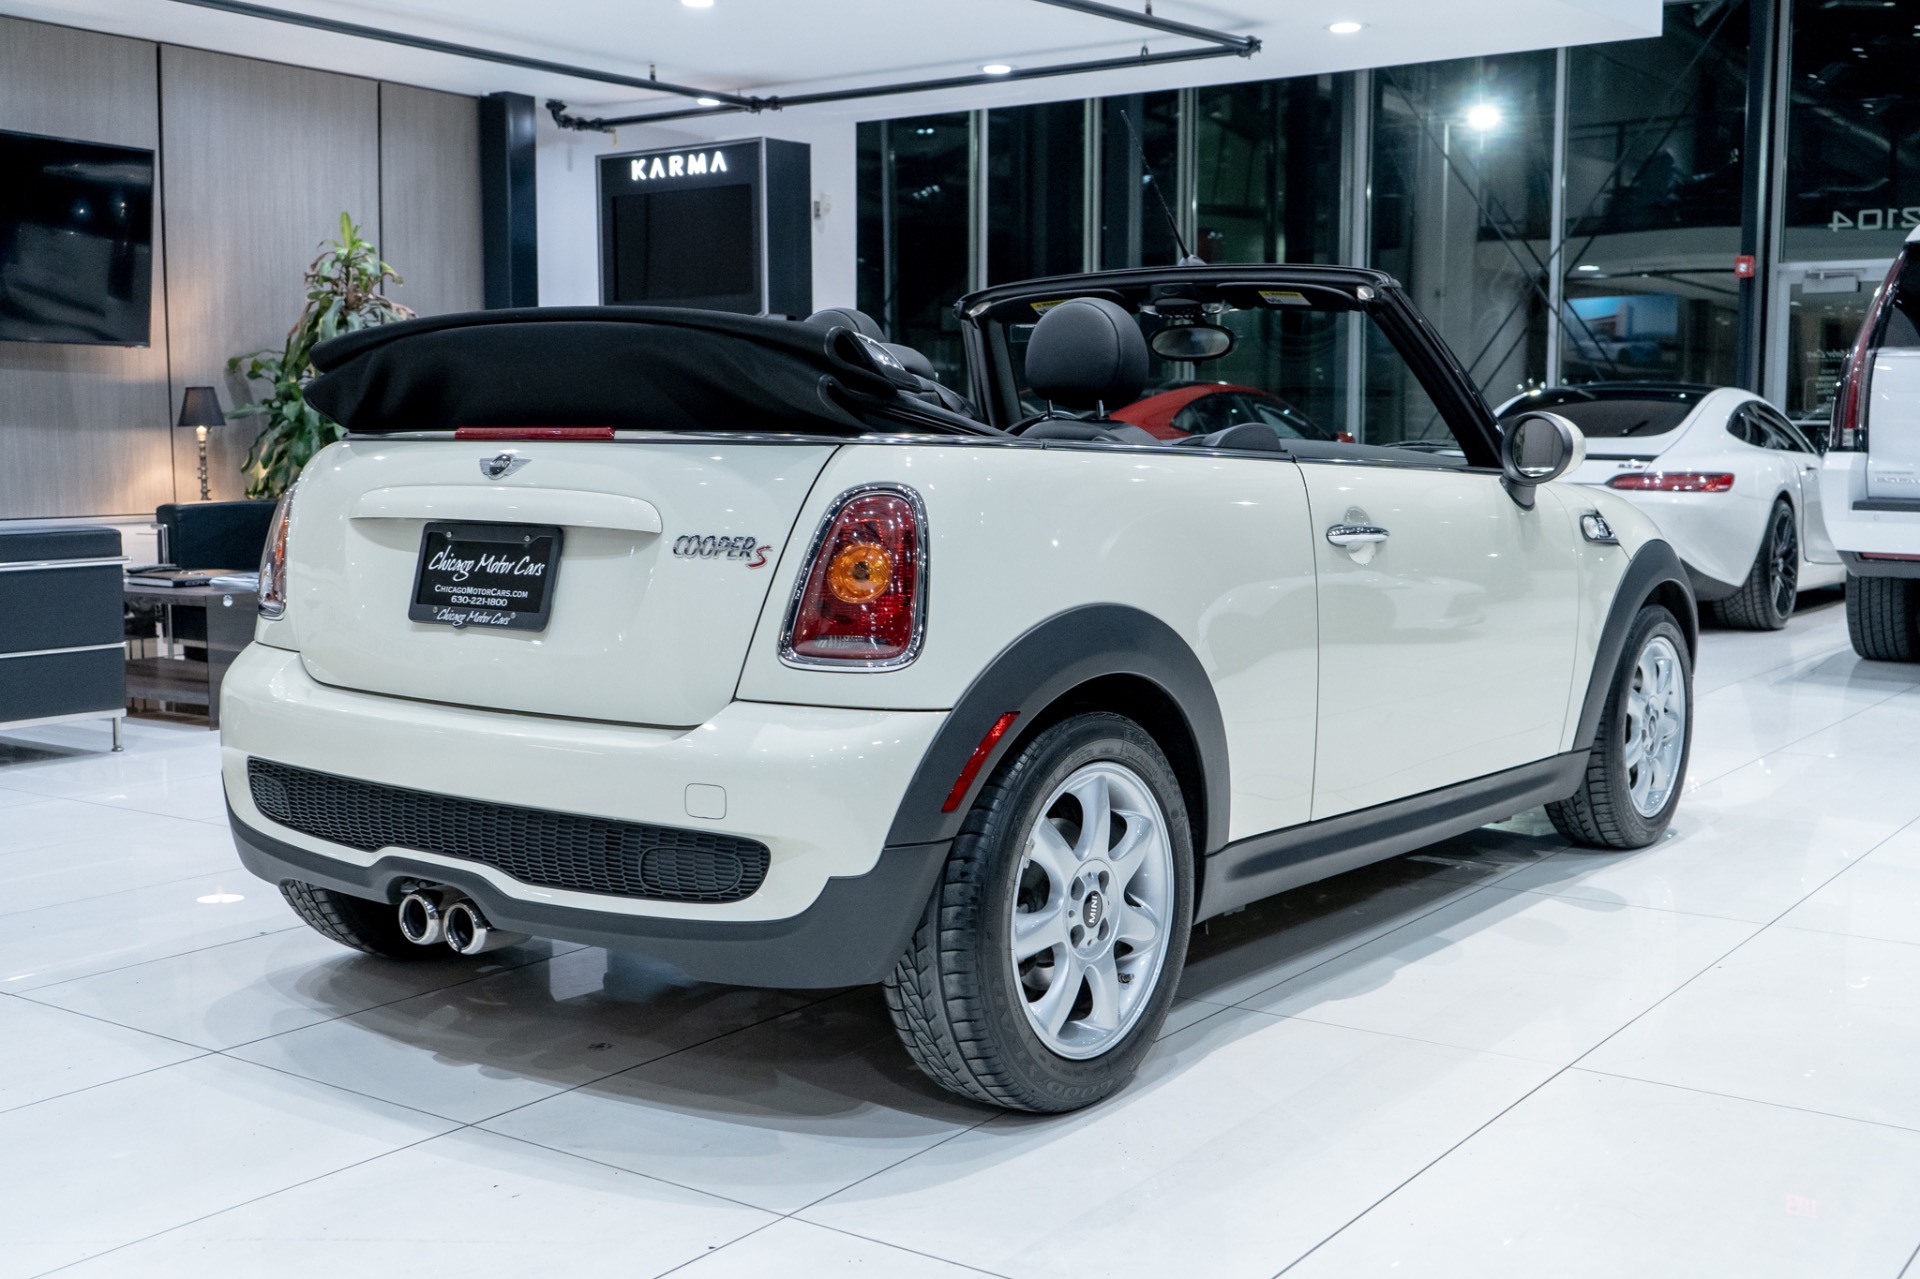 Used 2010 MINI Cooper S Convertible Turbocharged ONLY 16K Miles ...